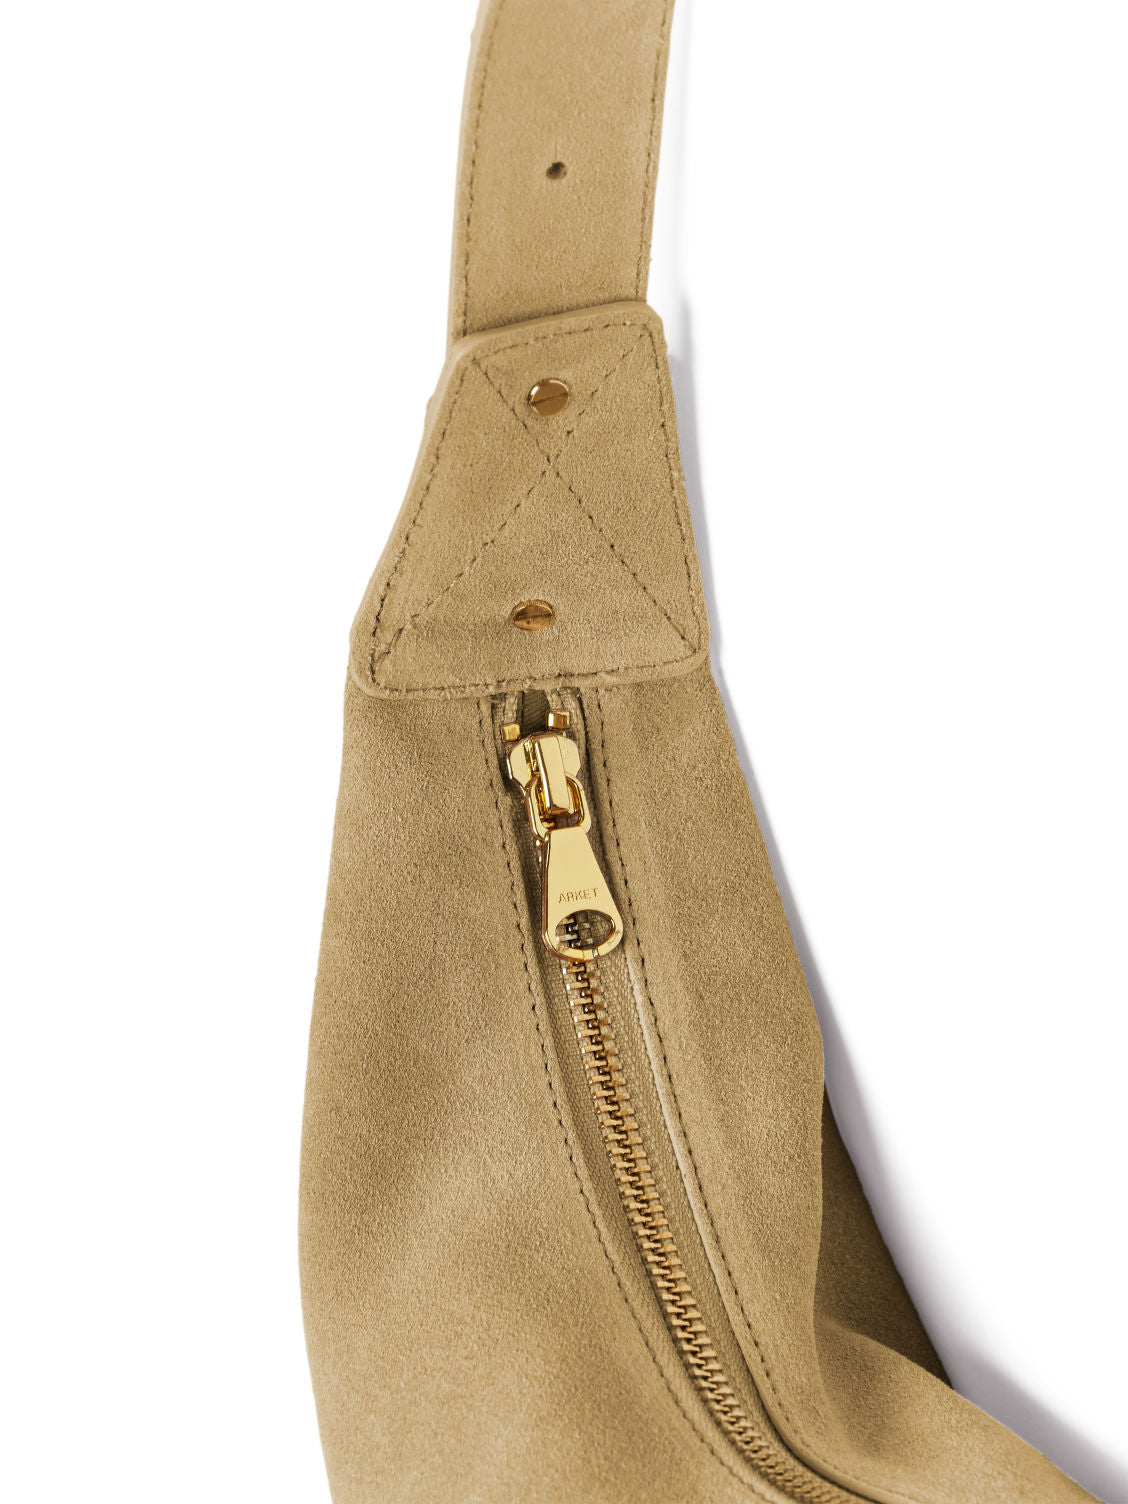 Curved suede bag